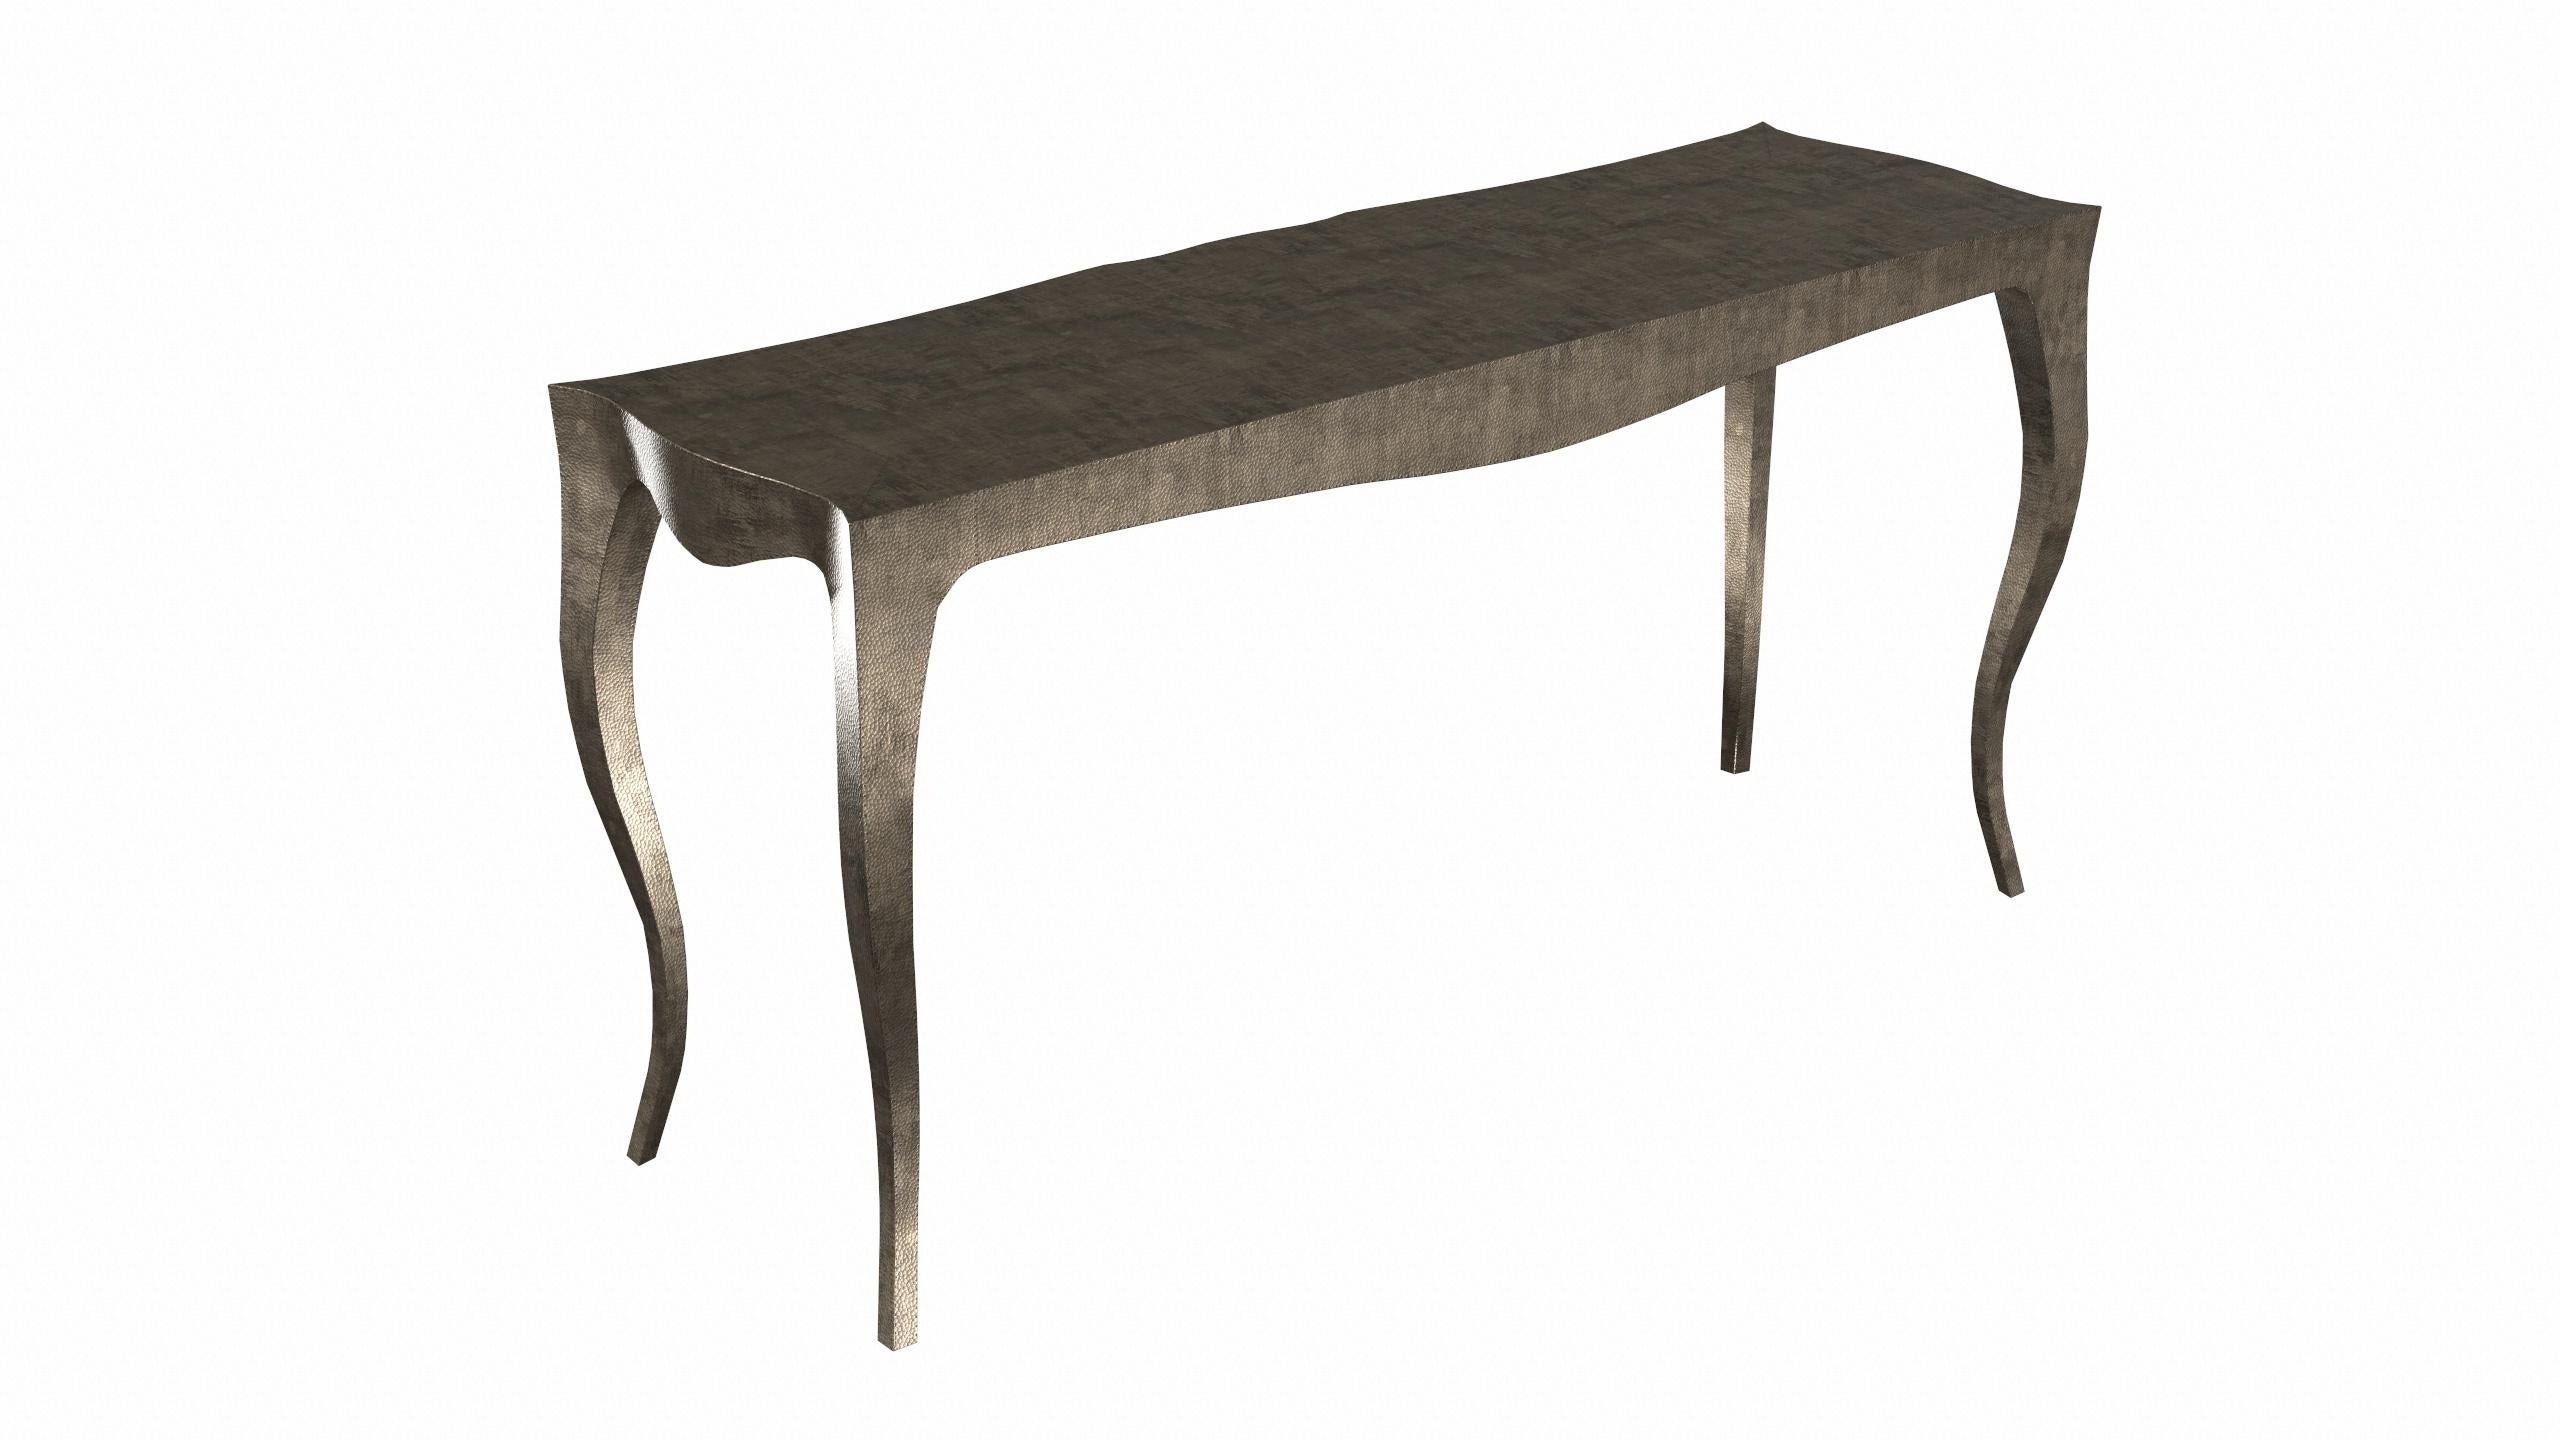 Wood Louise Console Art Deco Center Tables Mid. Hammered Antique Bronze For Sale